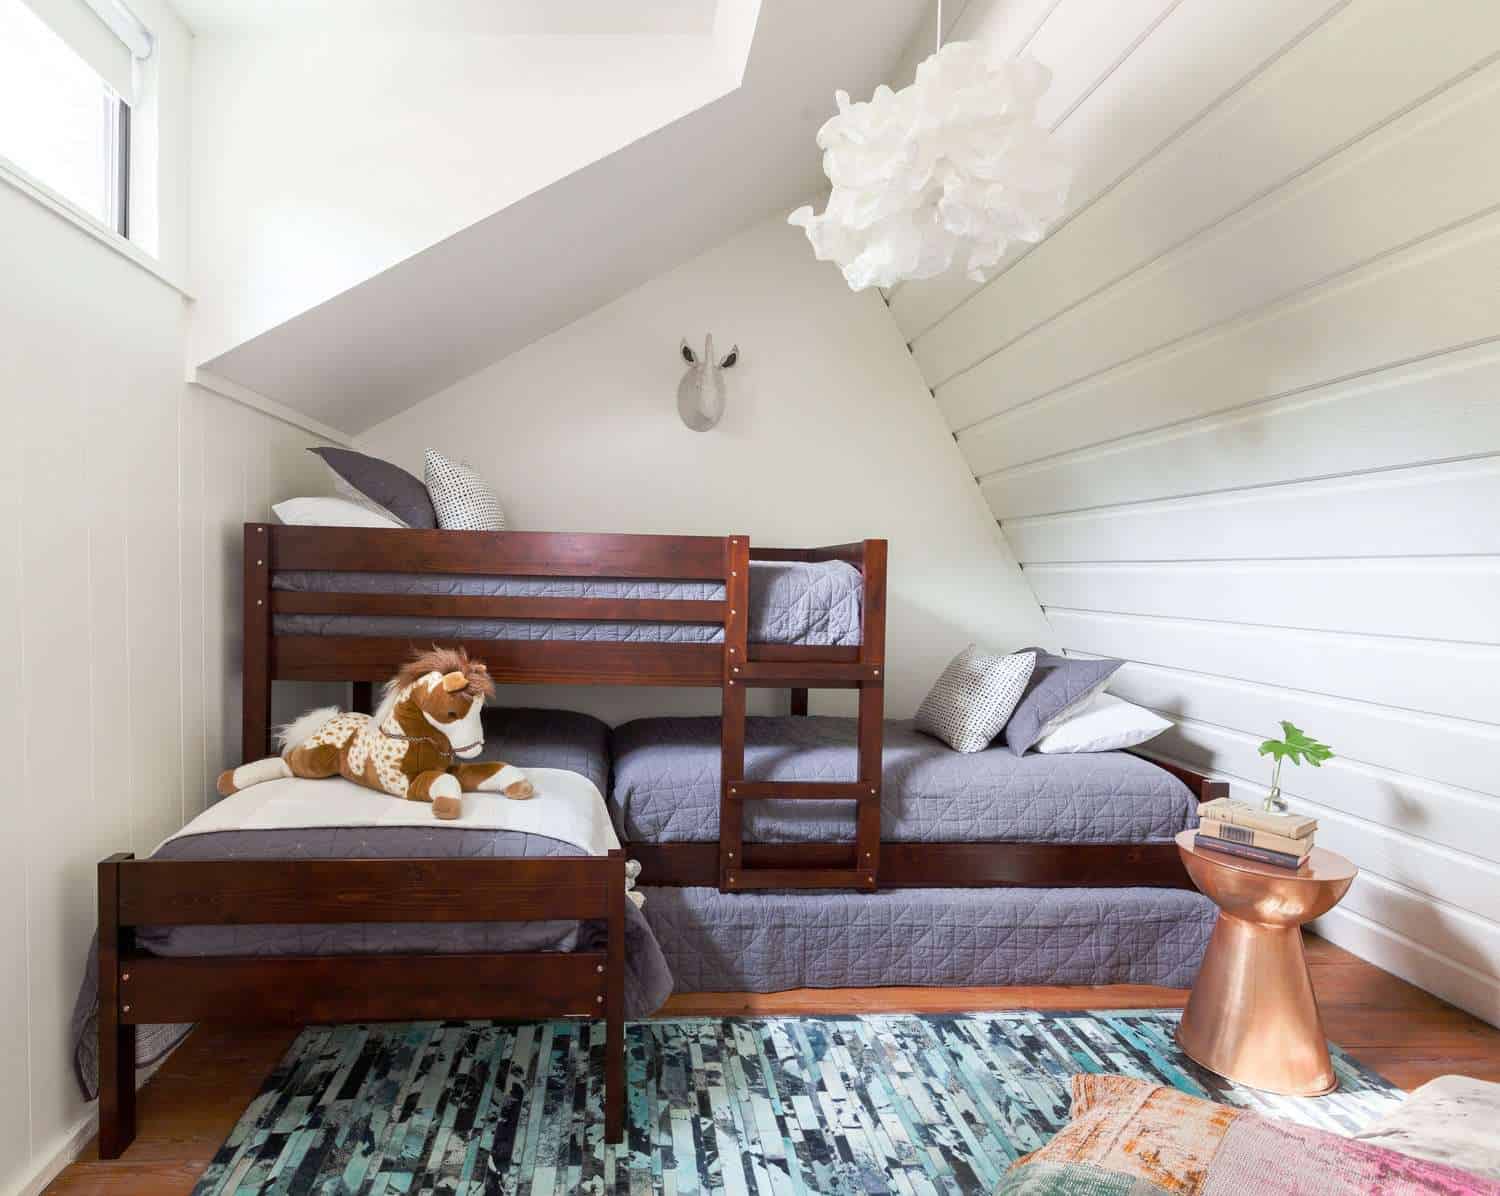 Bed ideas for odd spaces